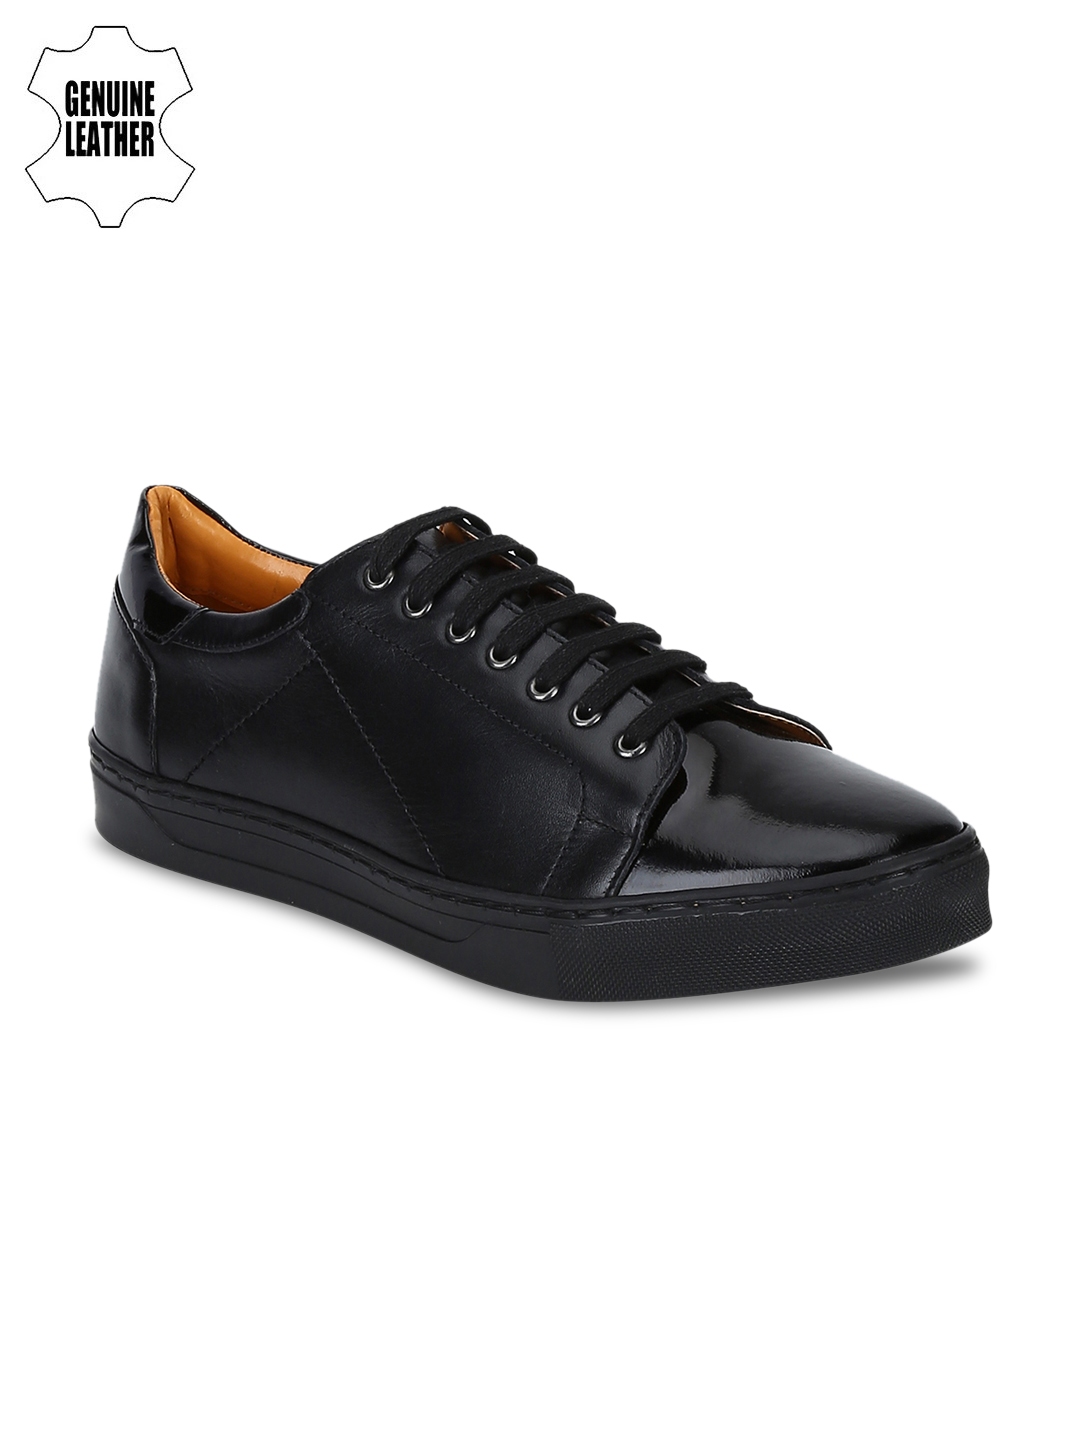 black patent leather sneakers